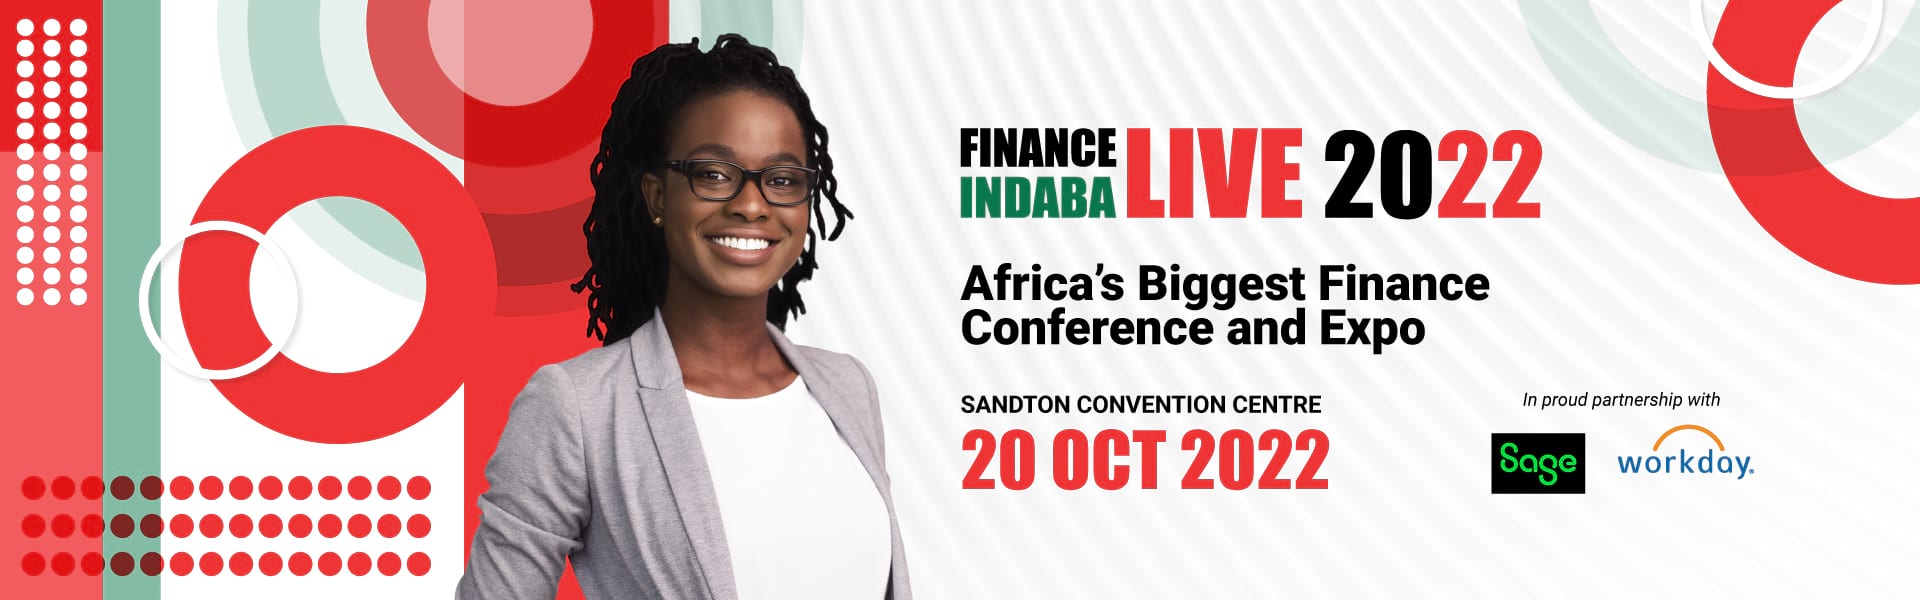 Oxalys exhibits at Finance Indaba Live 2022. Meet our team and procurement& spend management solutions